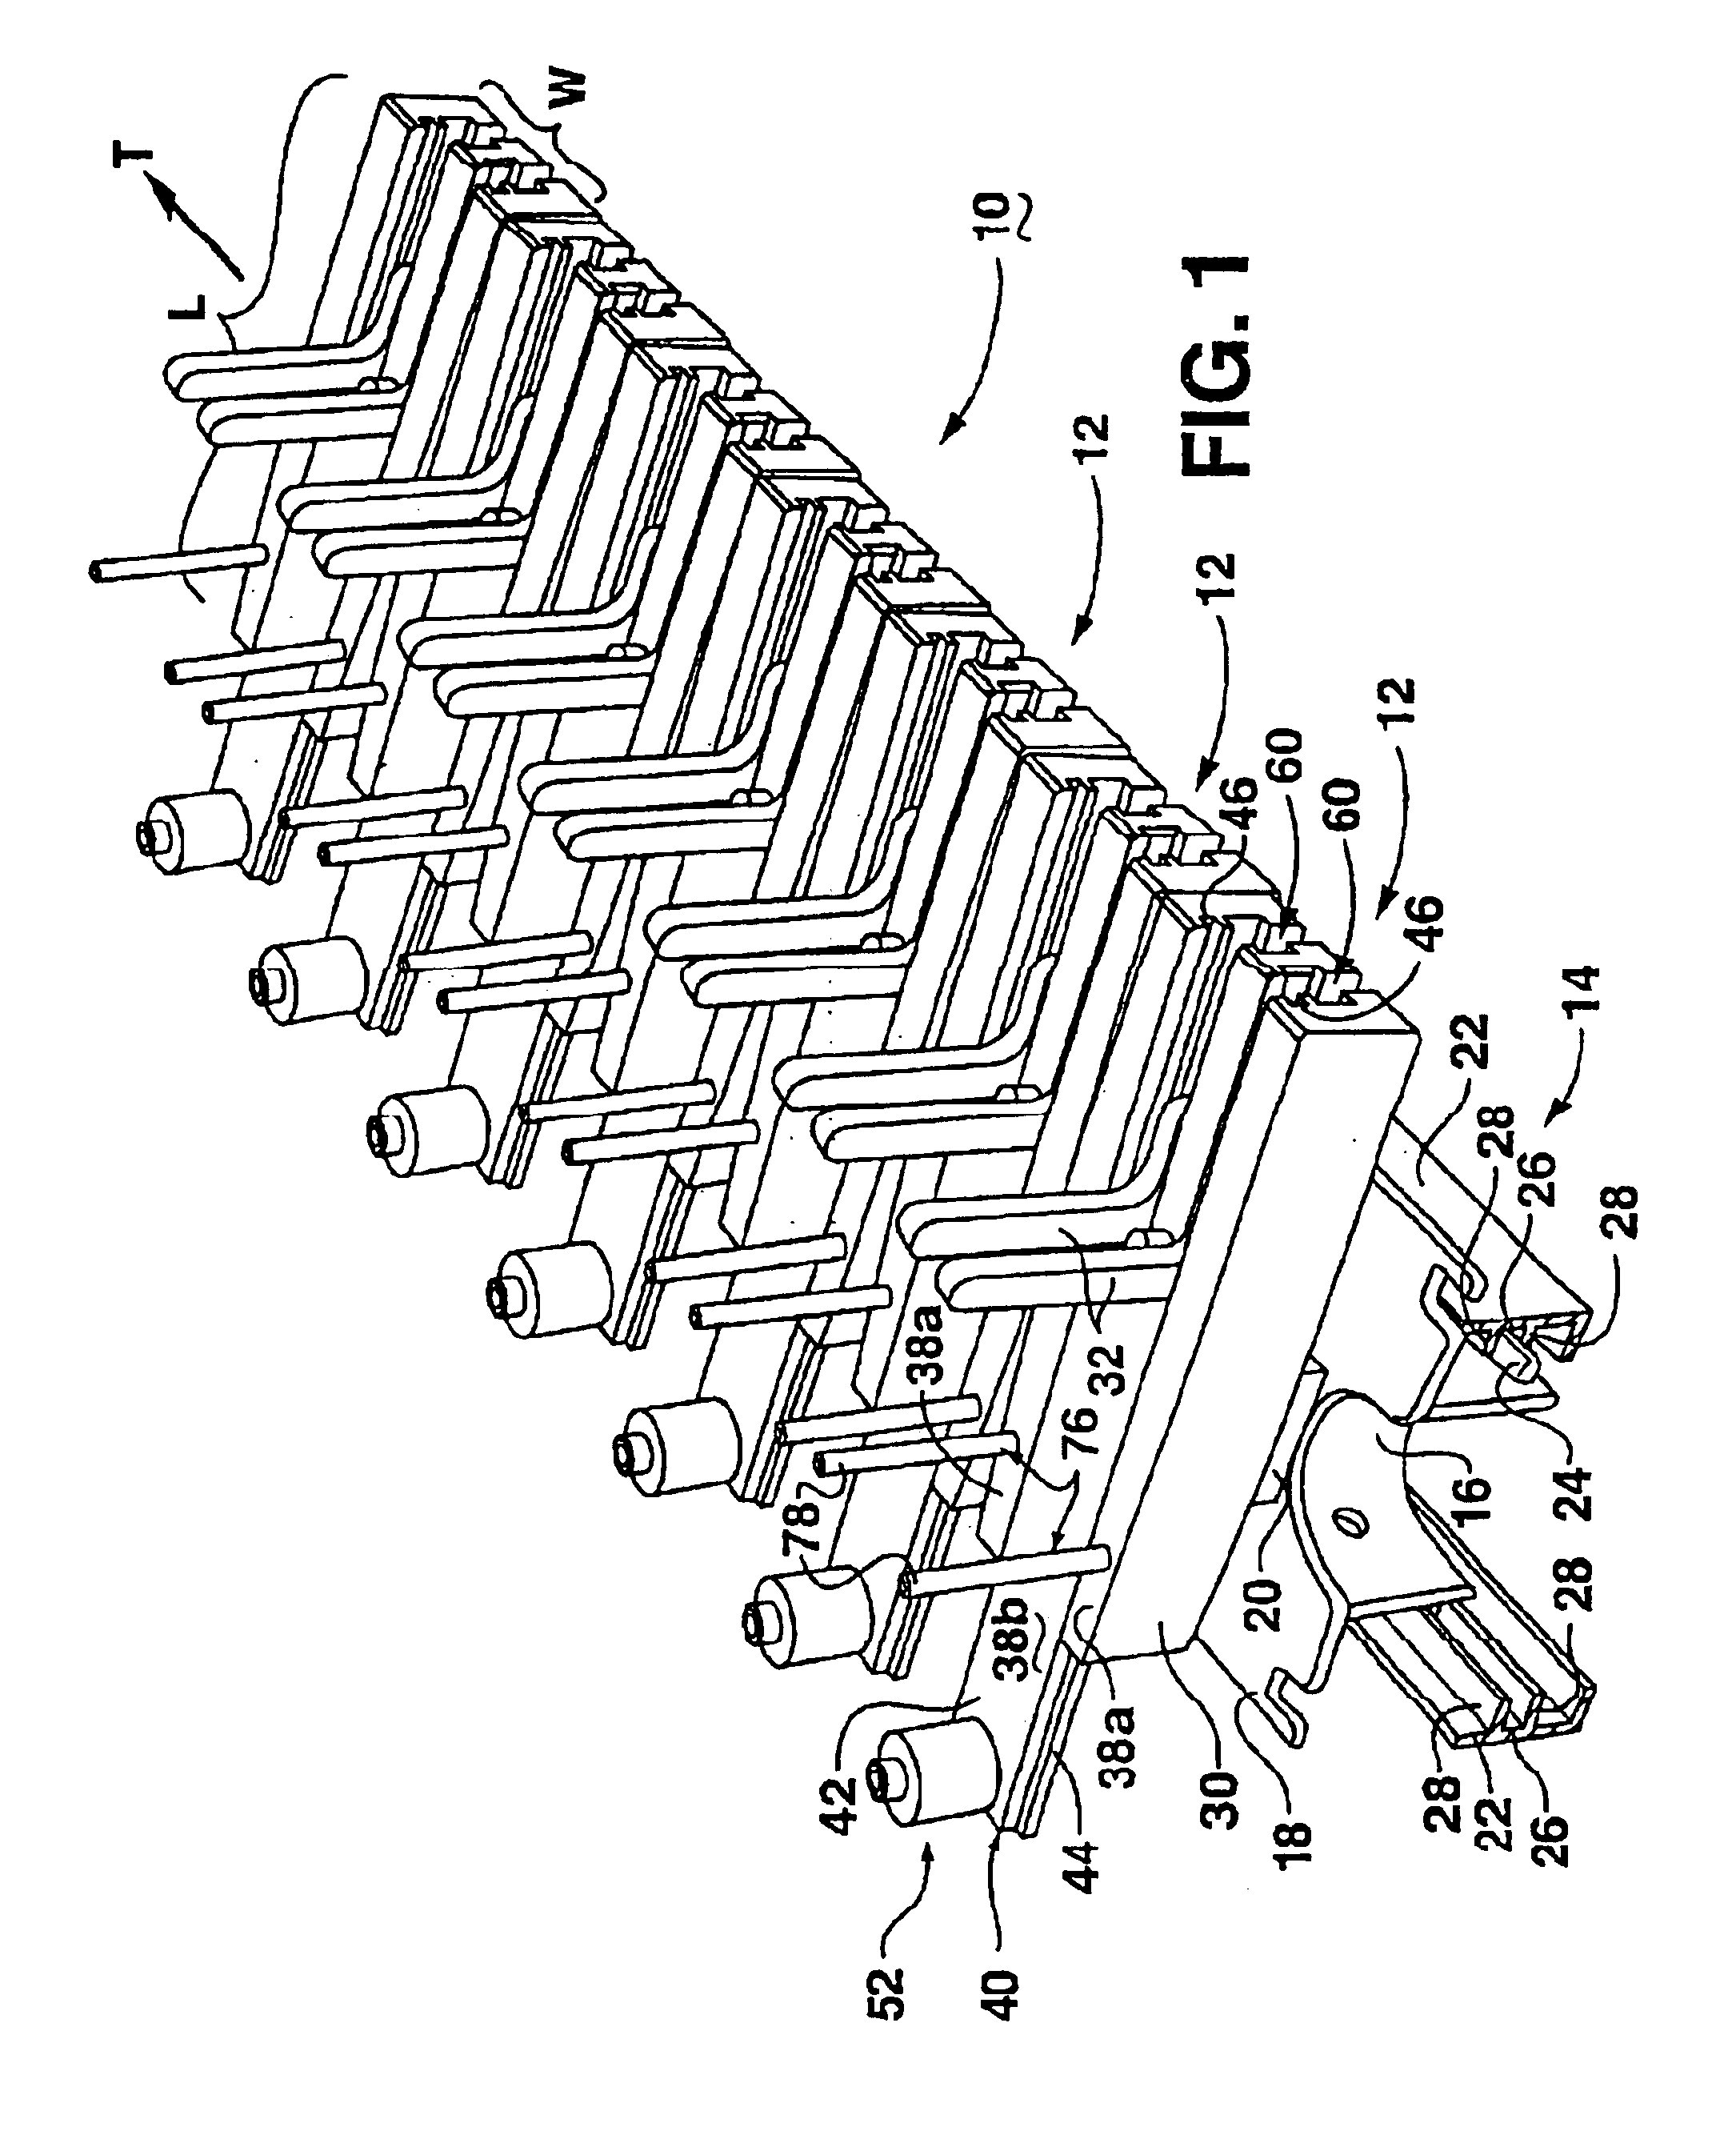 Gripper conveyor with clear conveying path and related conveyor link